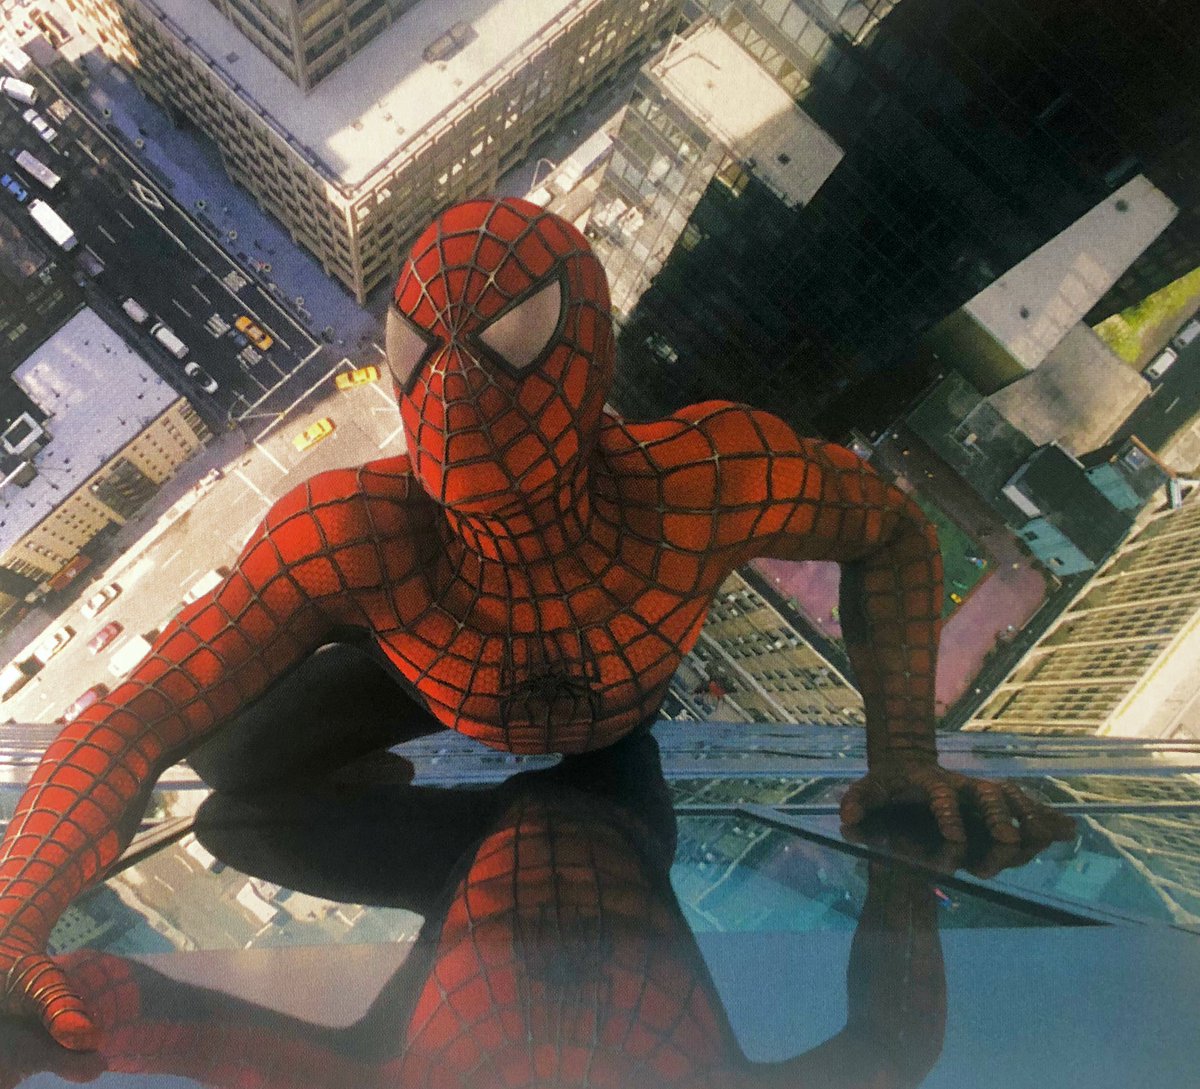 RT @EARTH_96283: Spider-Man (2002)
Promotional photo https://t.co/AeYzz8eGWo